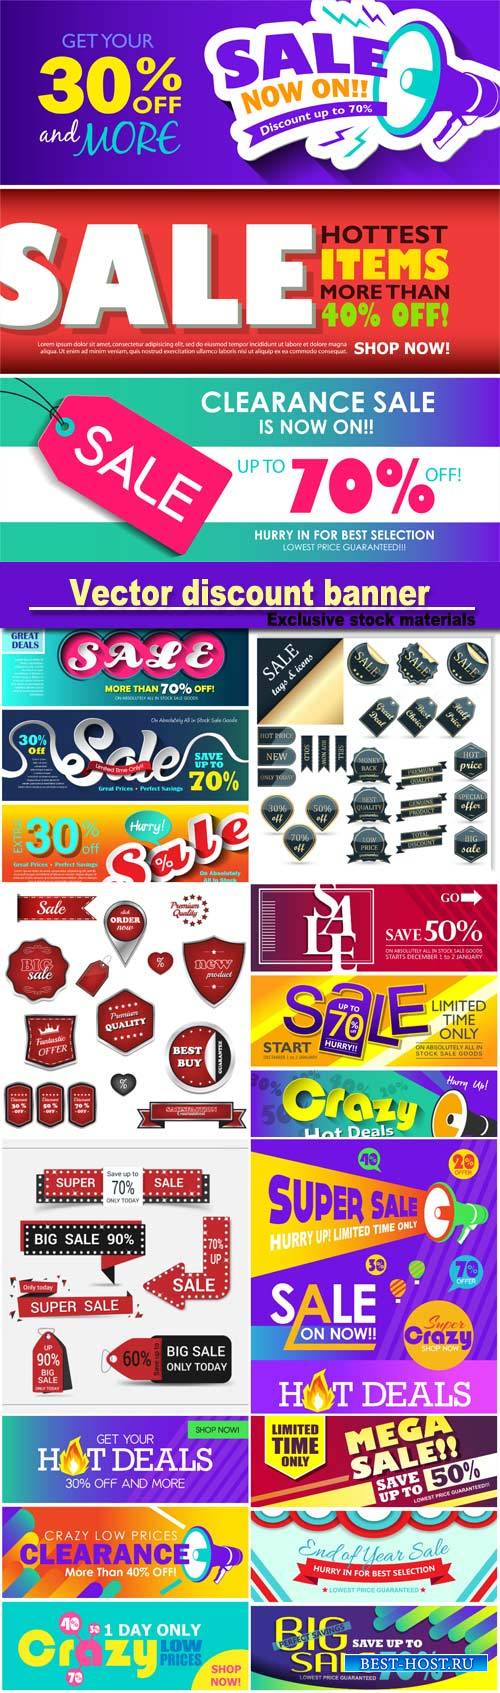 Sale tags and icons, vector discount banner